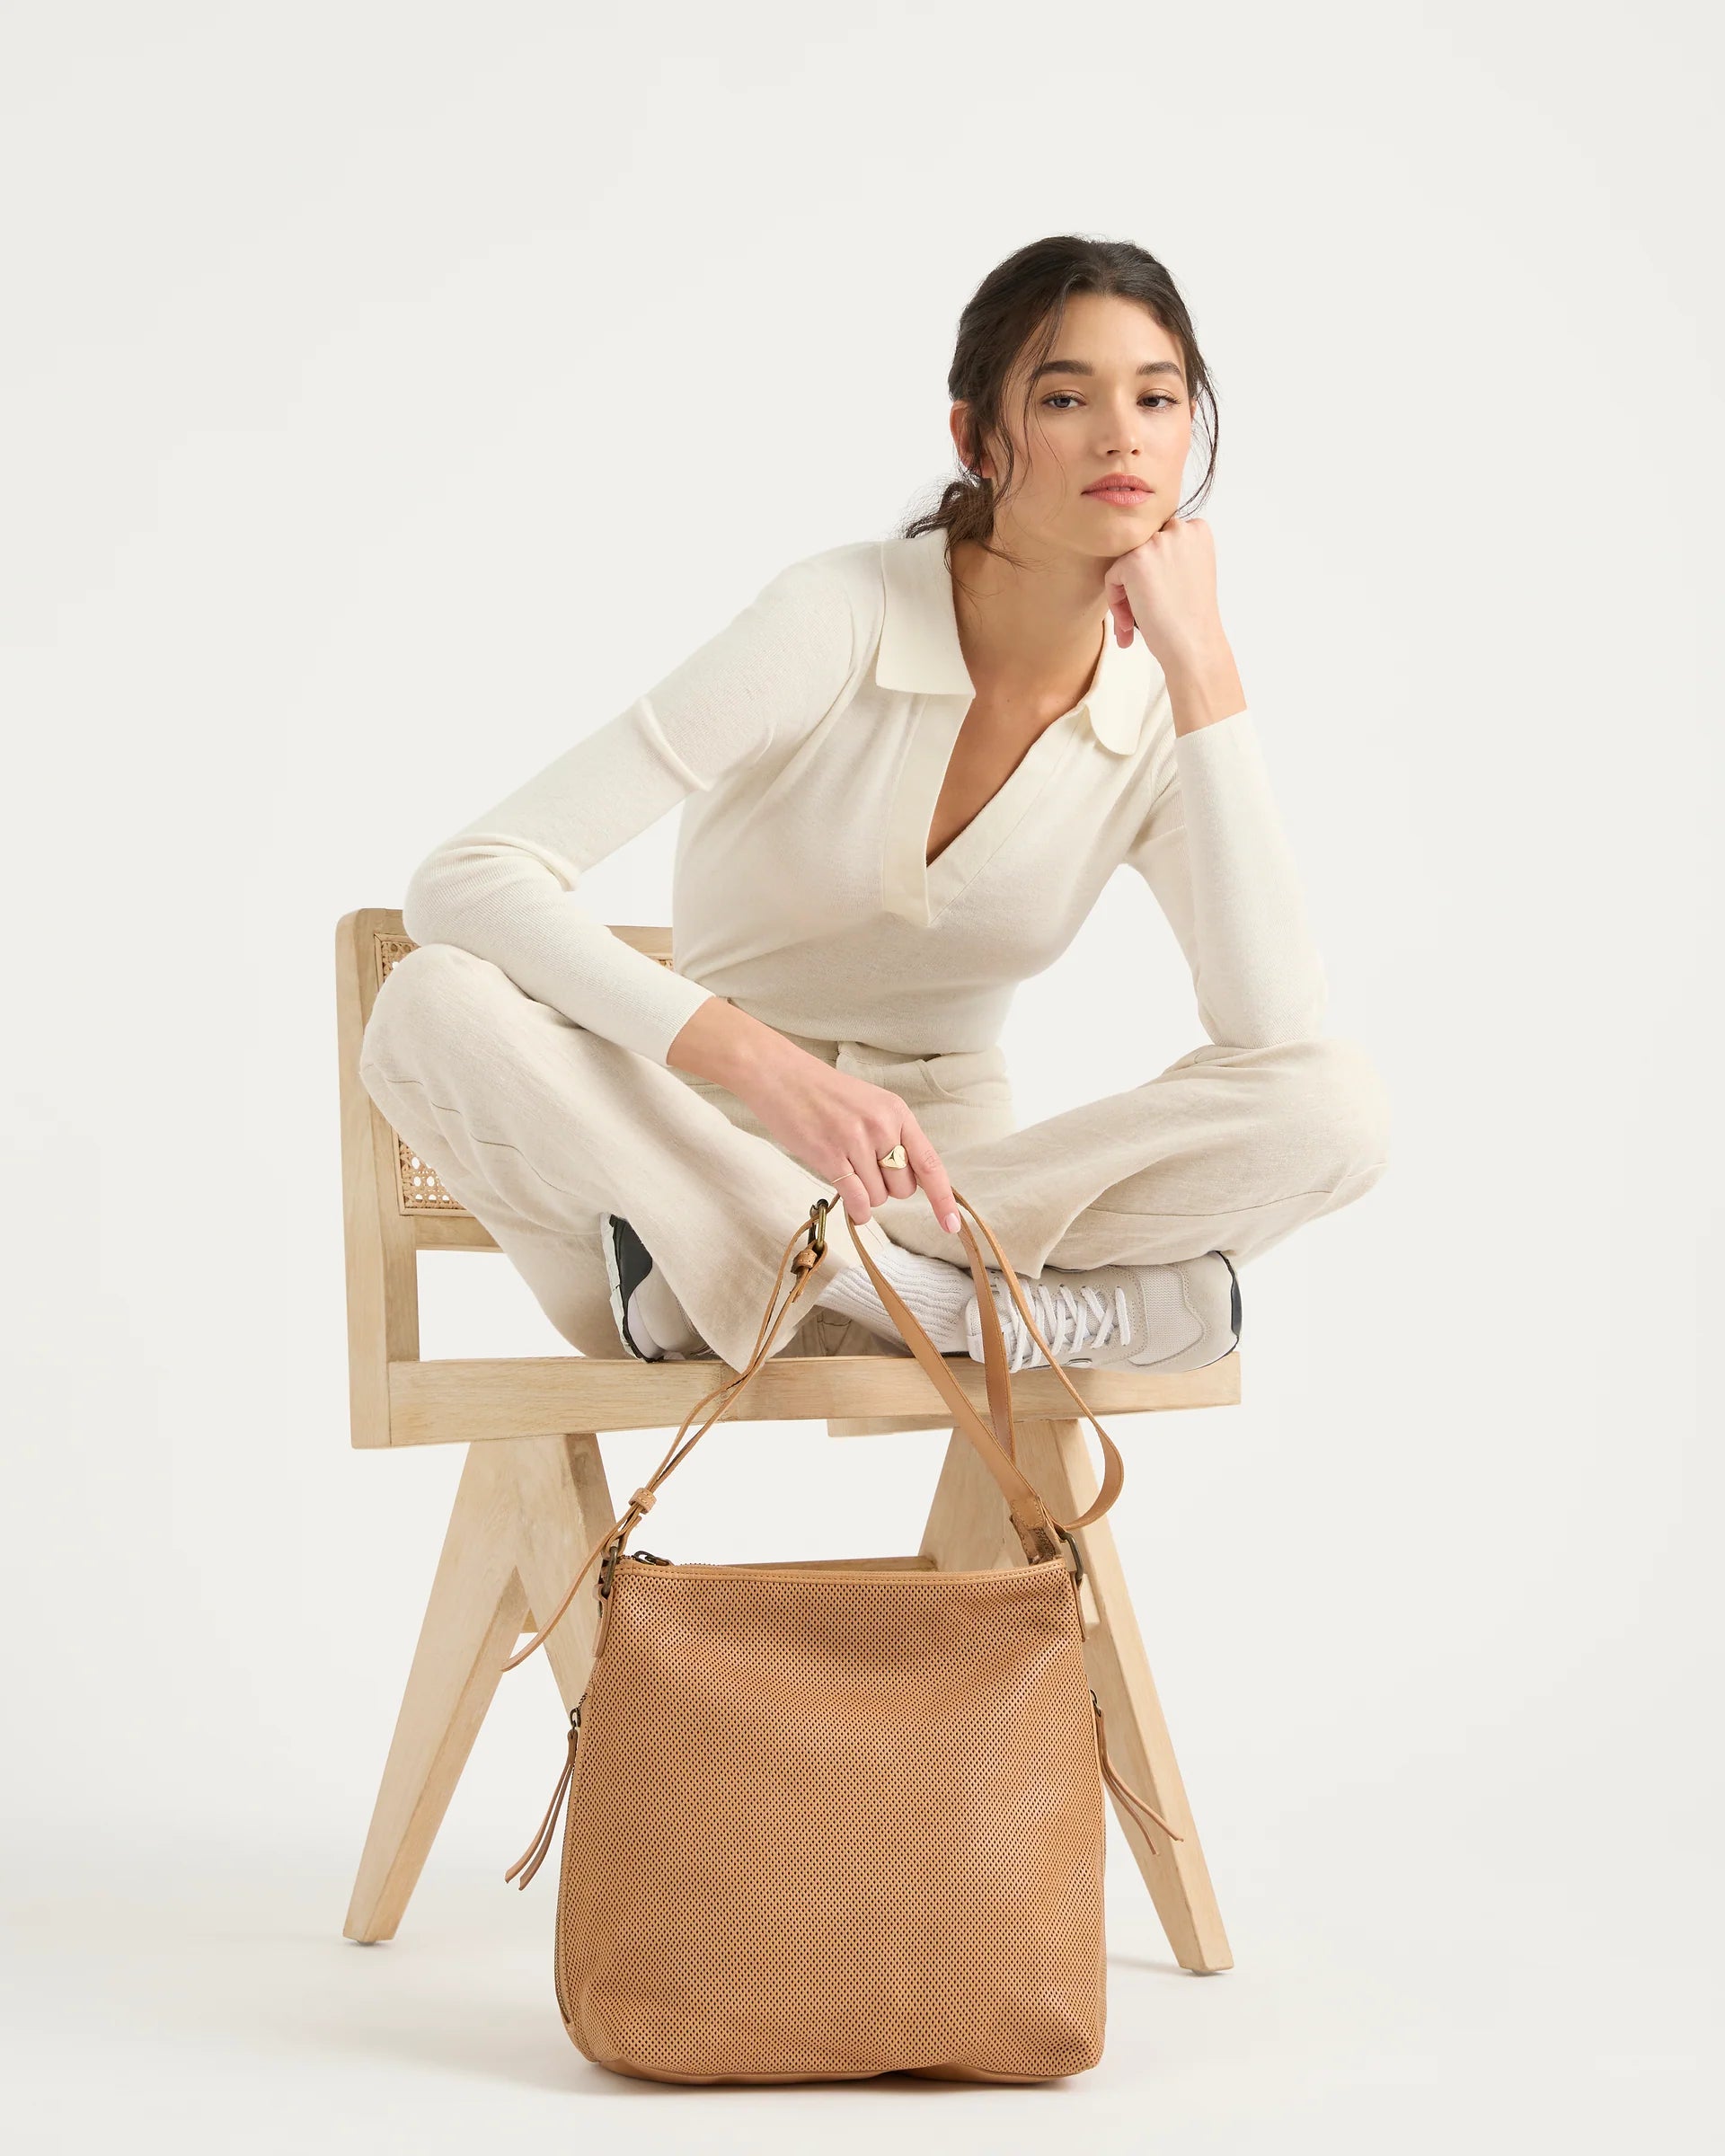 Perforated Leather Slouchy | Tan - Juju & Co - Beechworth Emporium